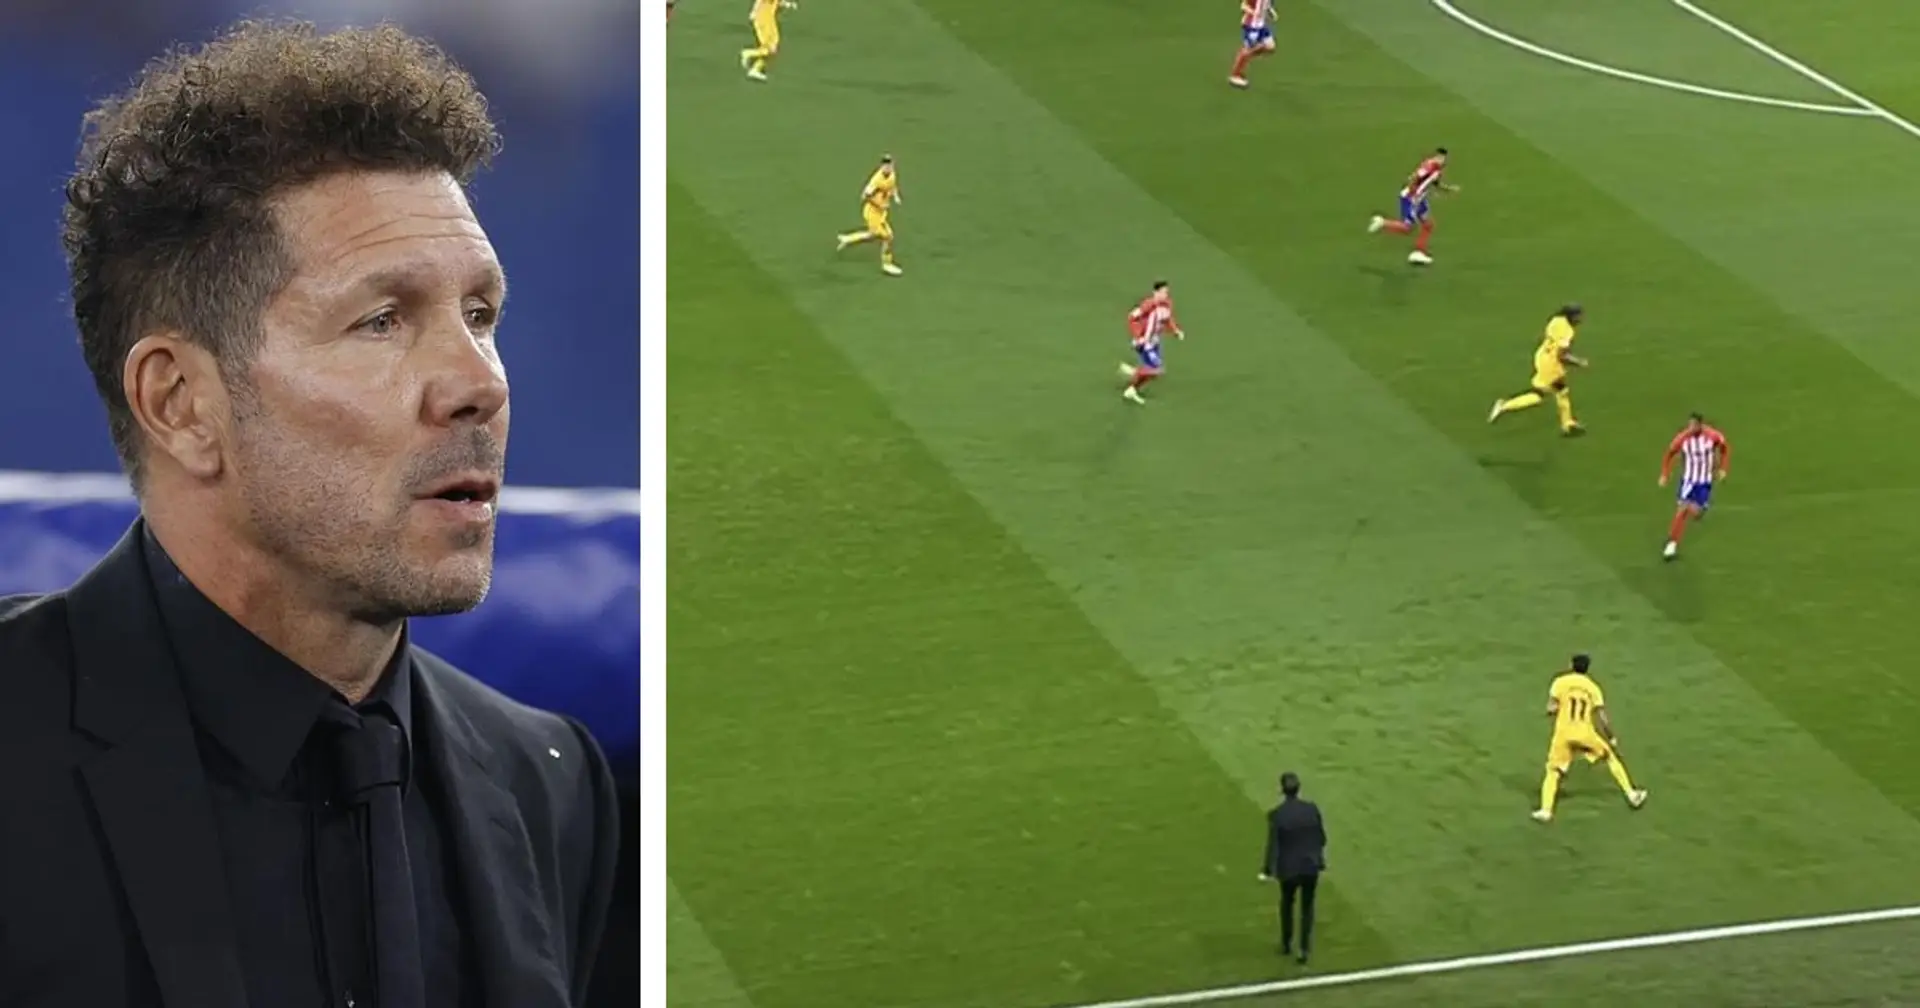 Spotted: Diego Simeone literally enters the pitch to instruct players vs Barca